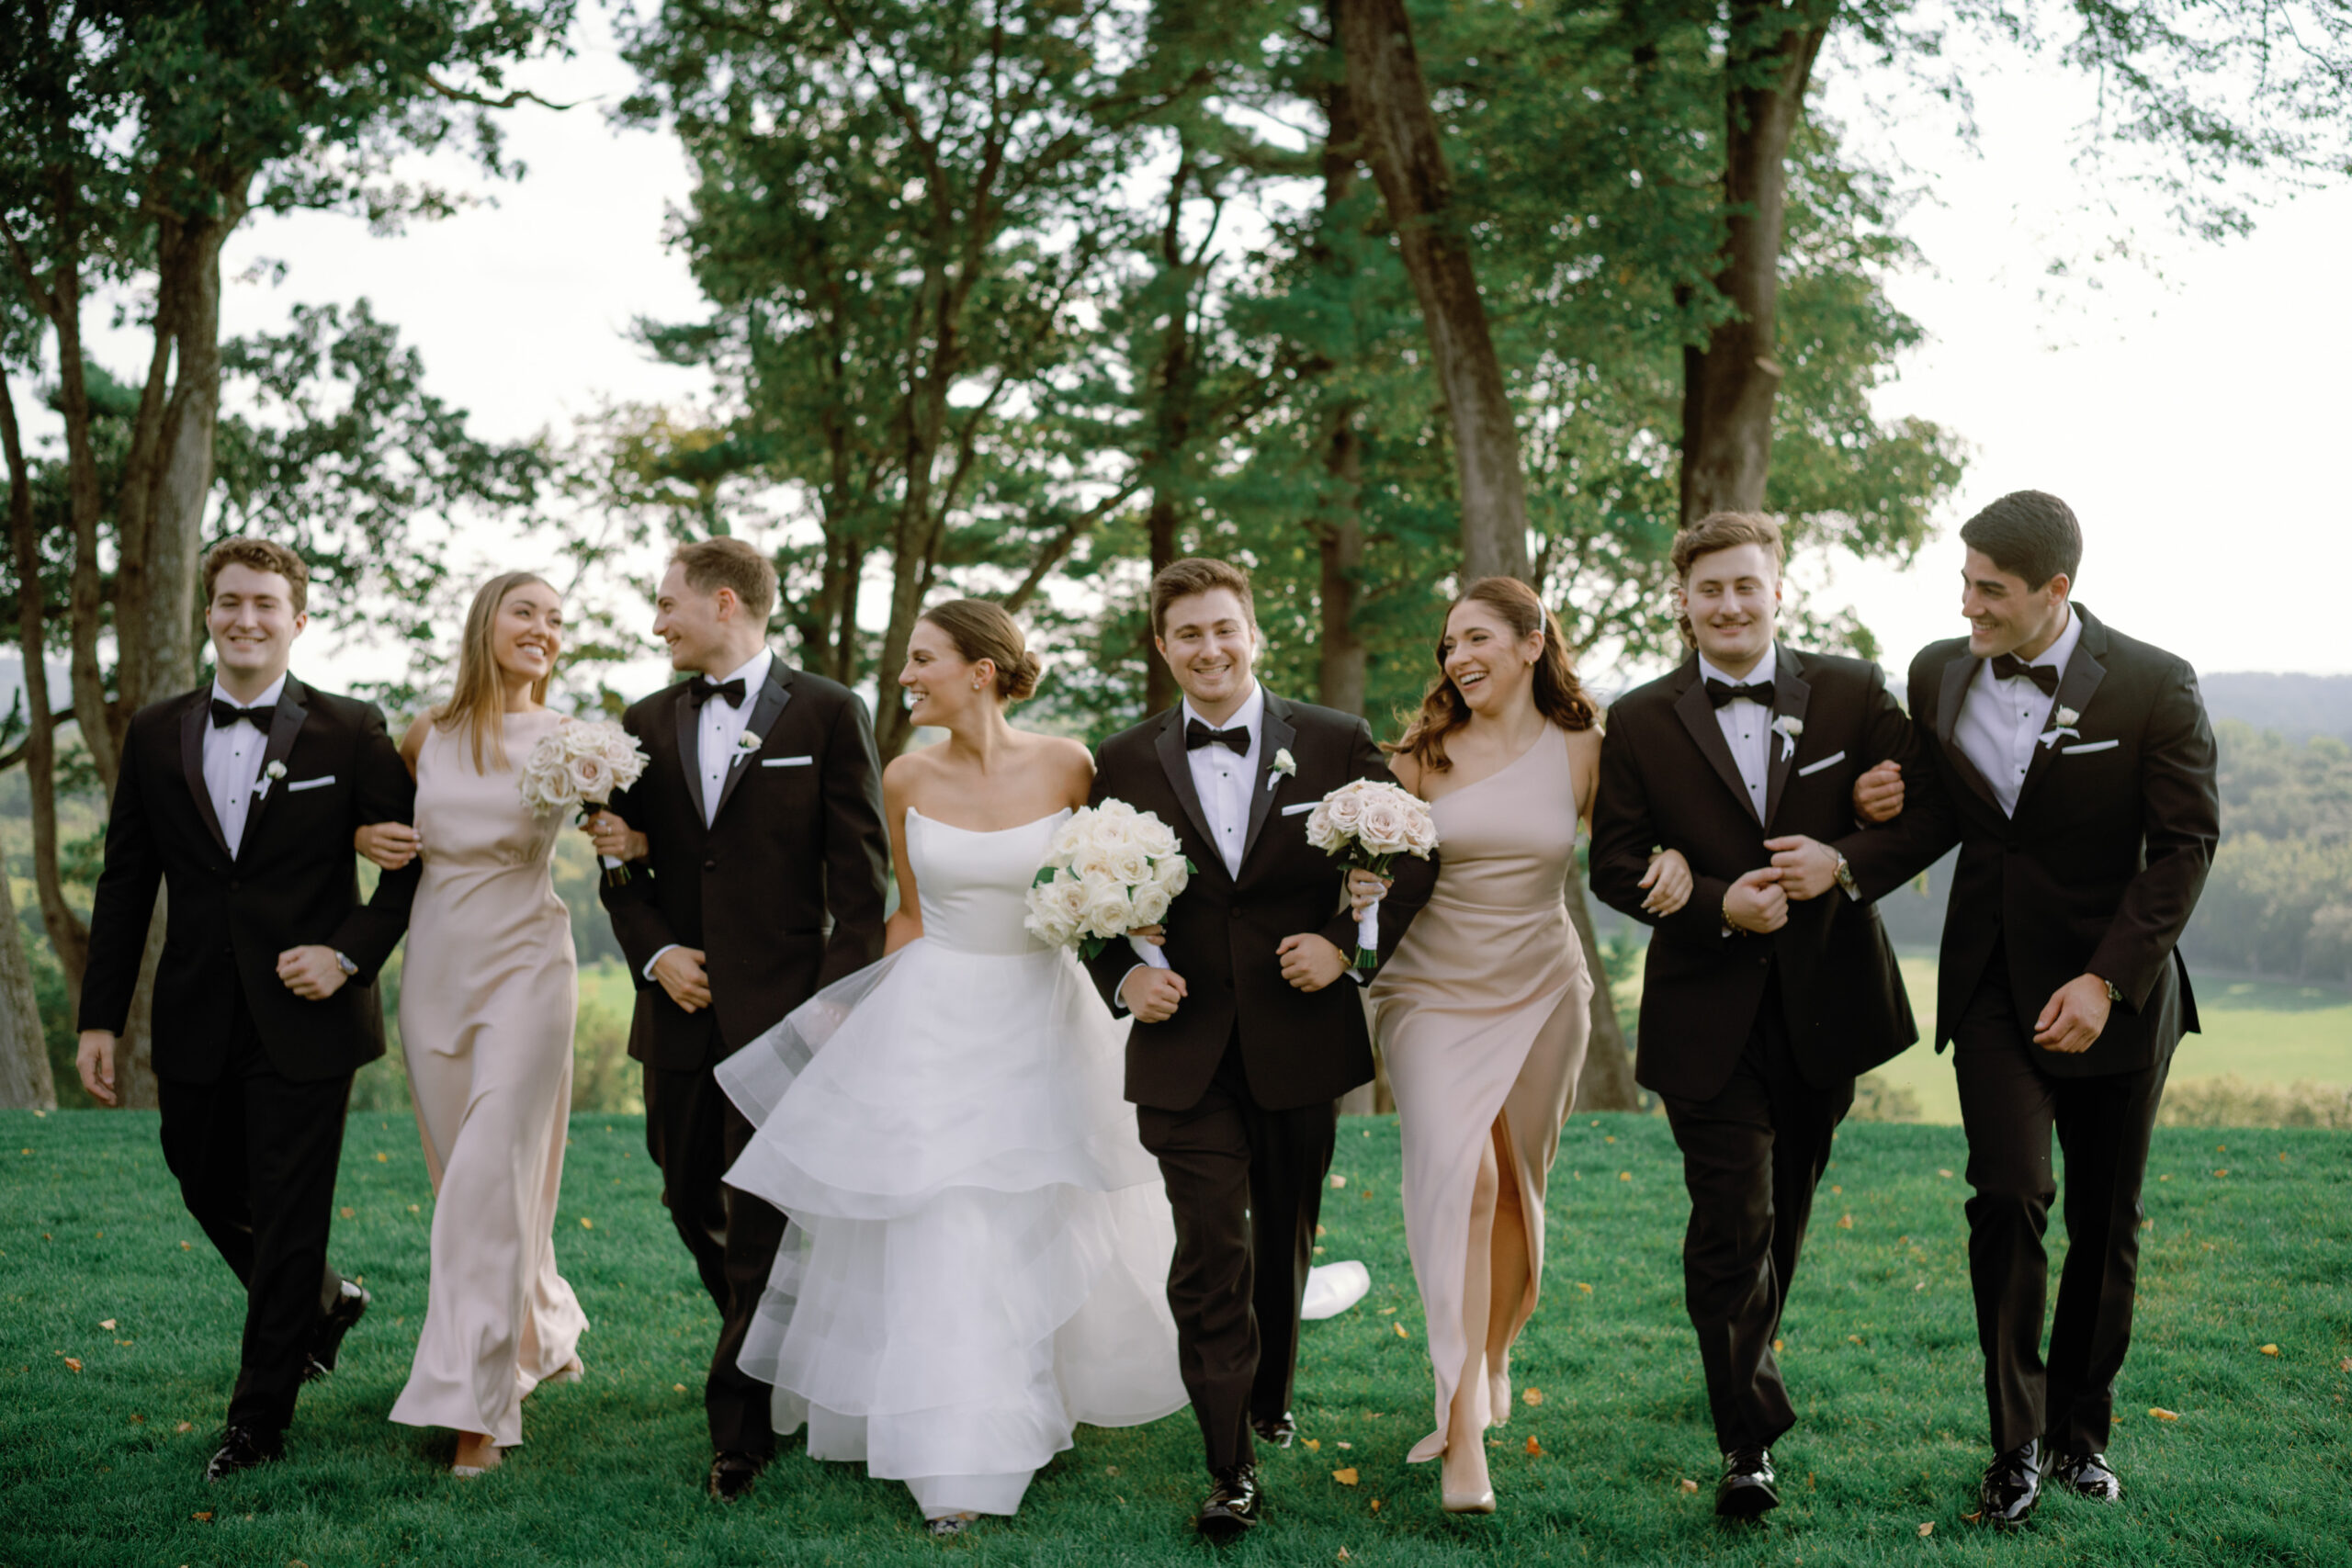 Editorial image of the bride and groom walking outdoors with their bridesmaids and groomsmen. Image by Jenny Fu Studio